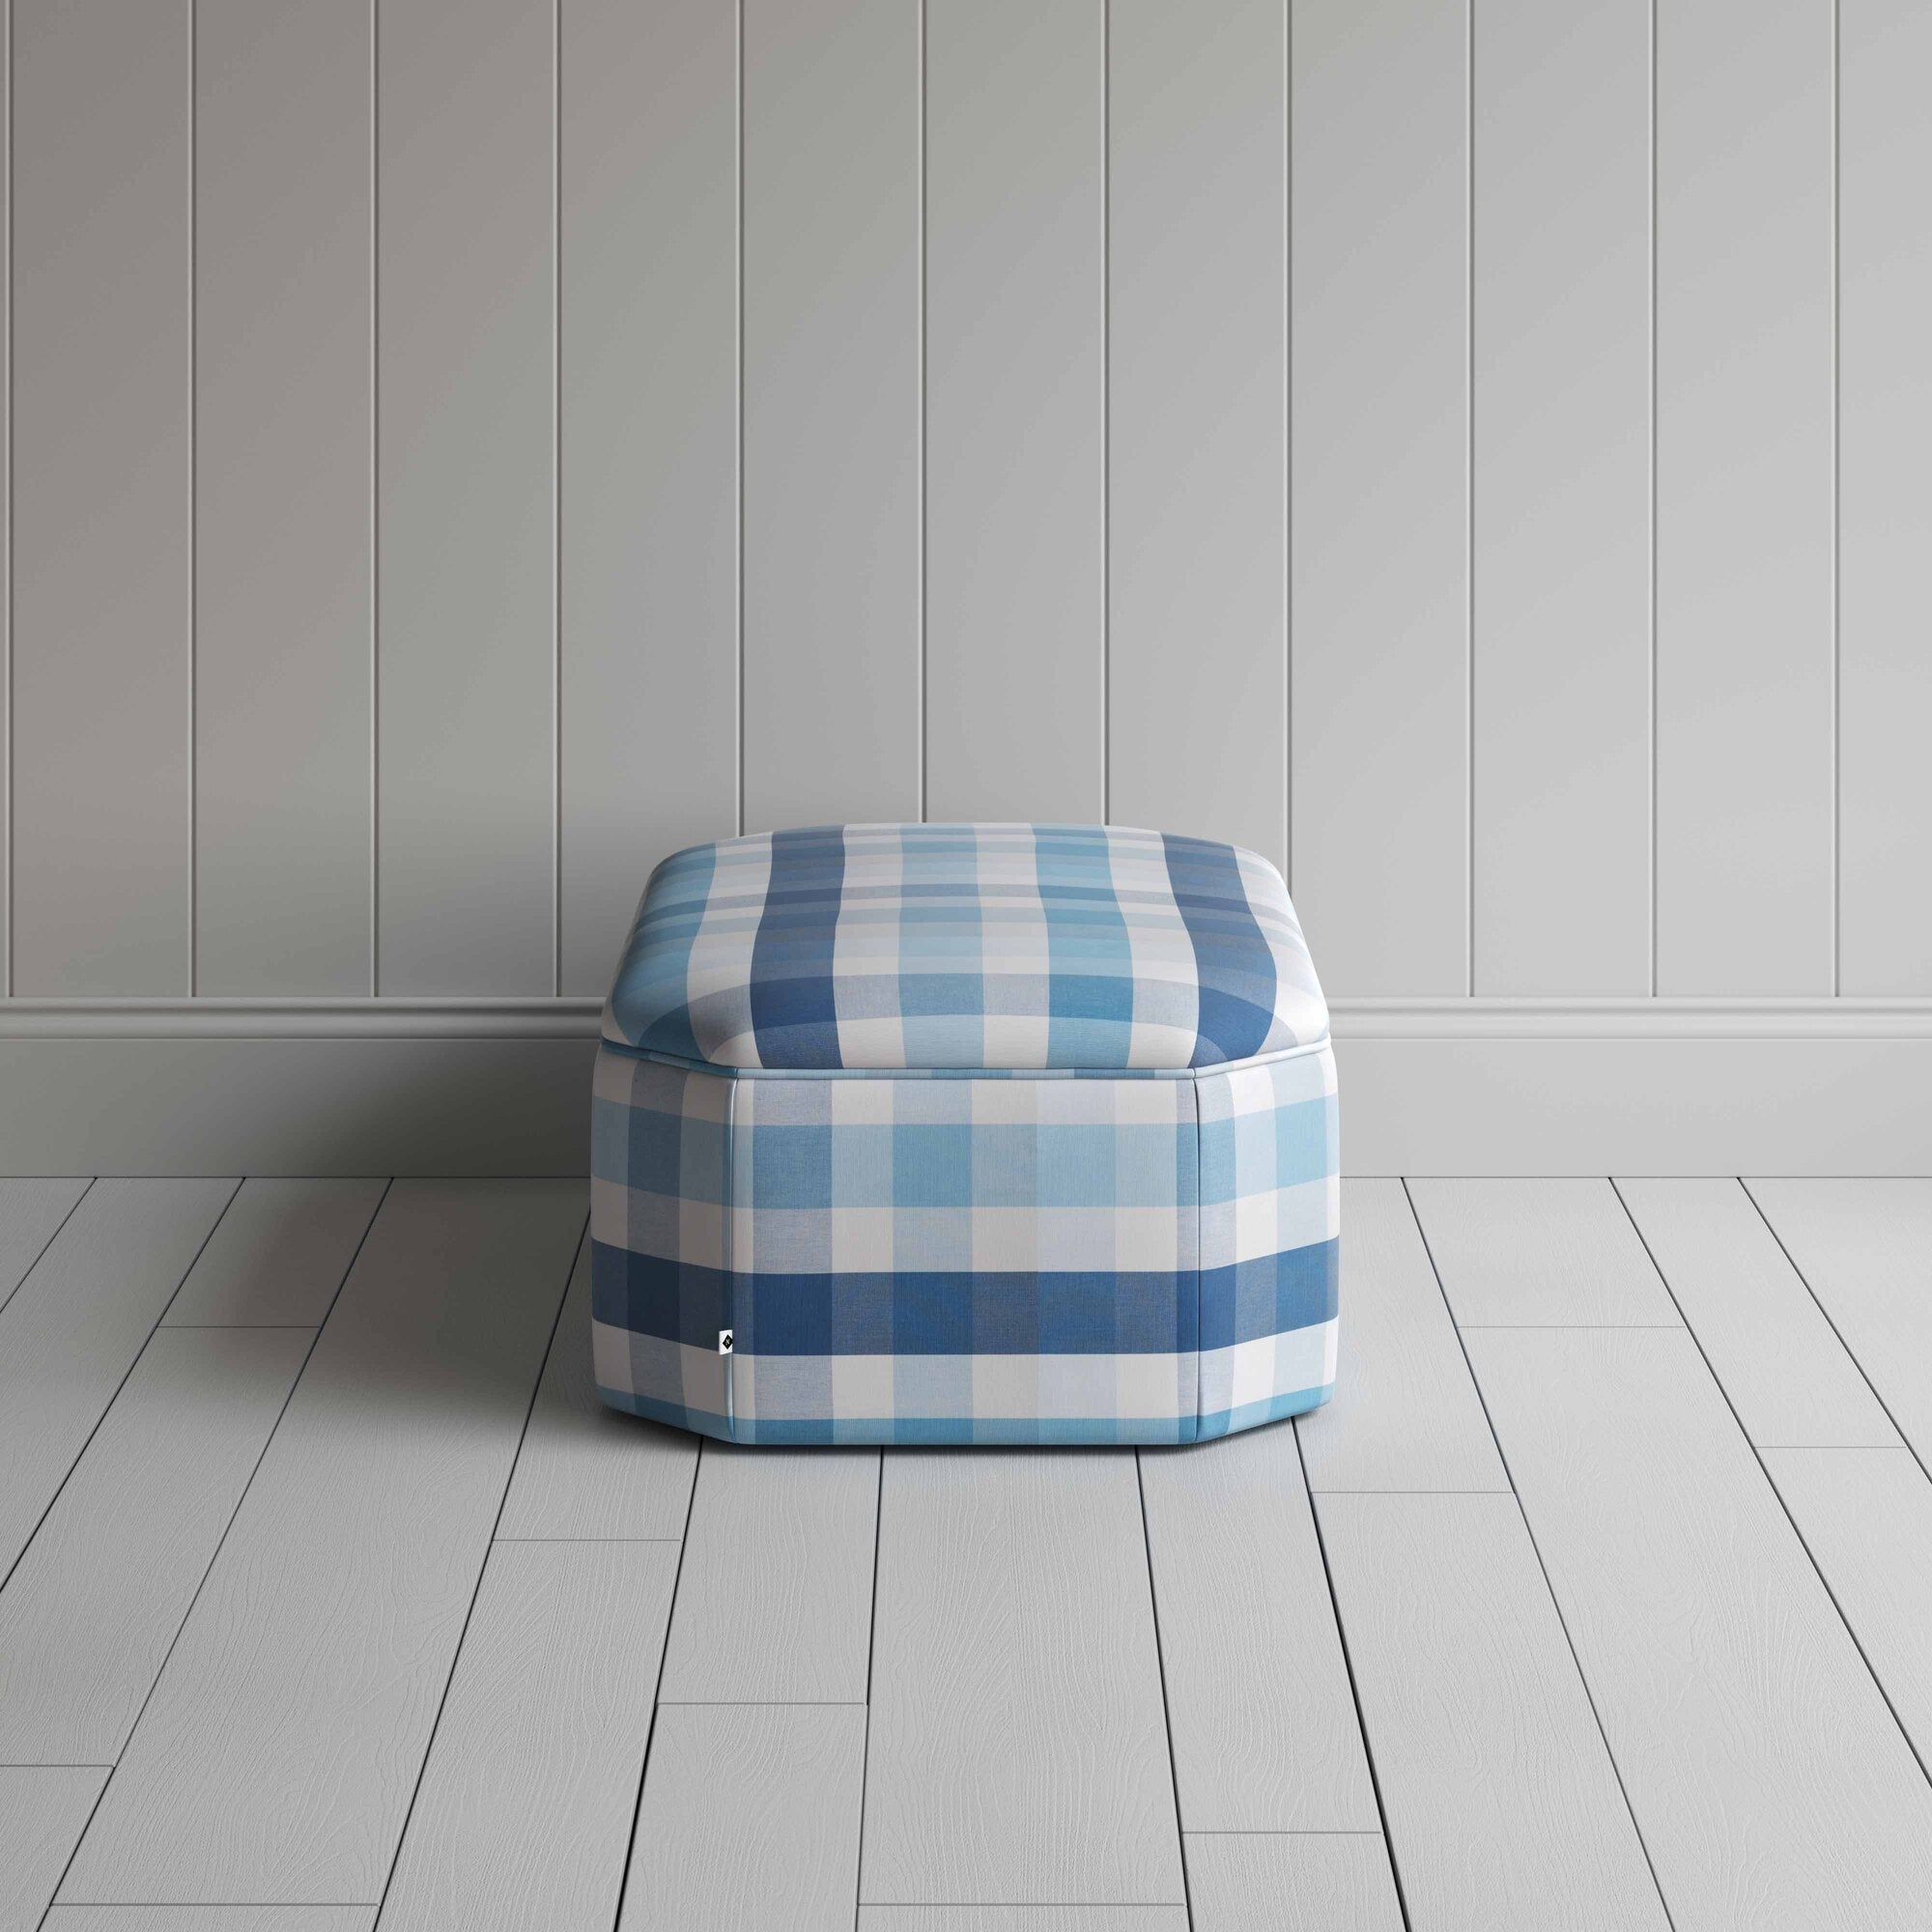  Hither Hexagonal Ottoman in Checkmate Cotton, Blue 